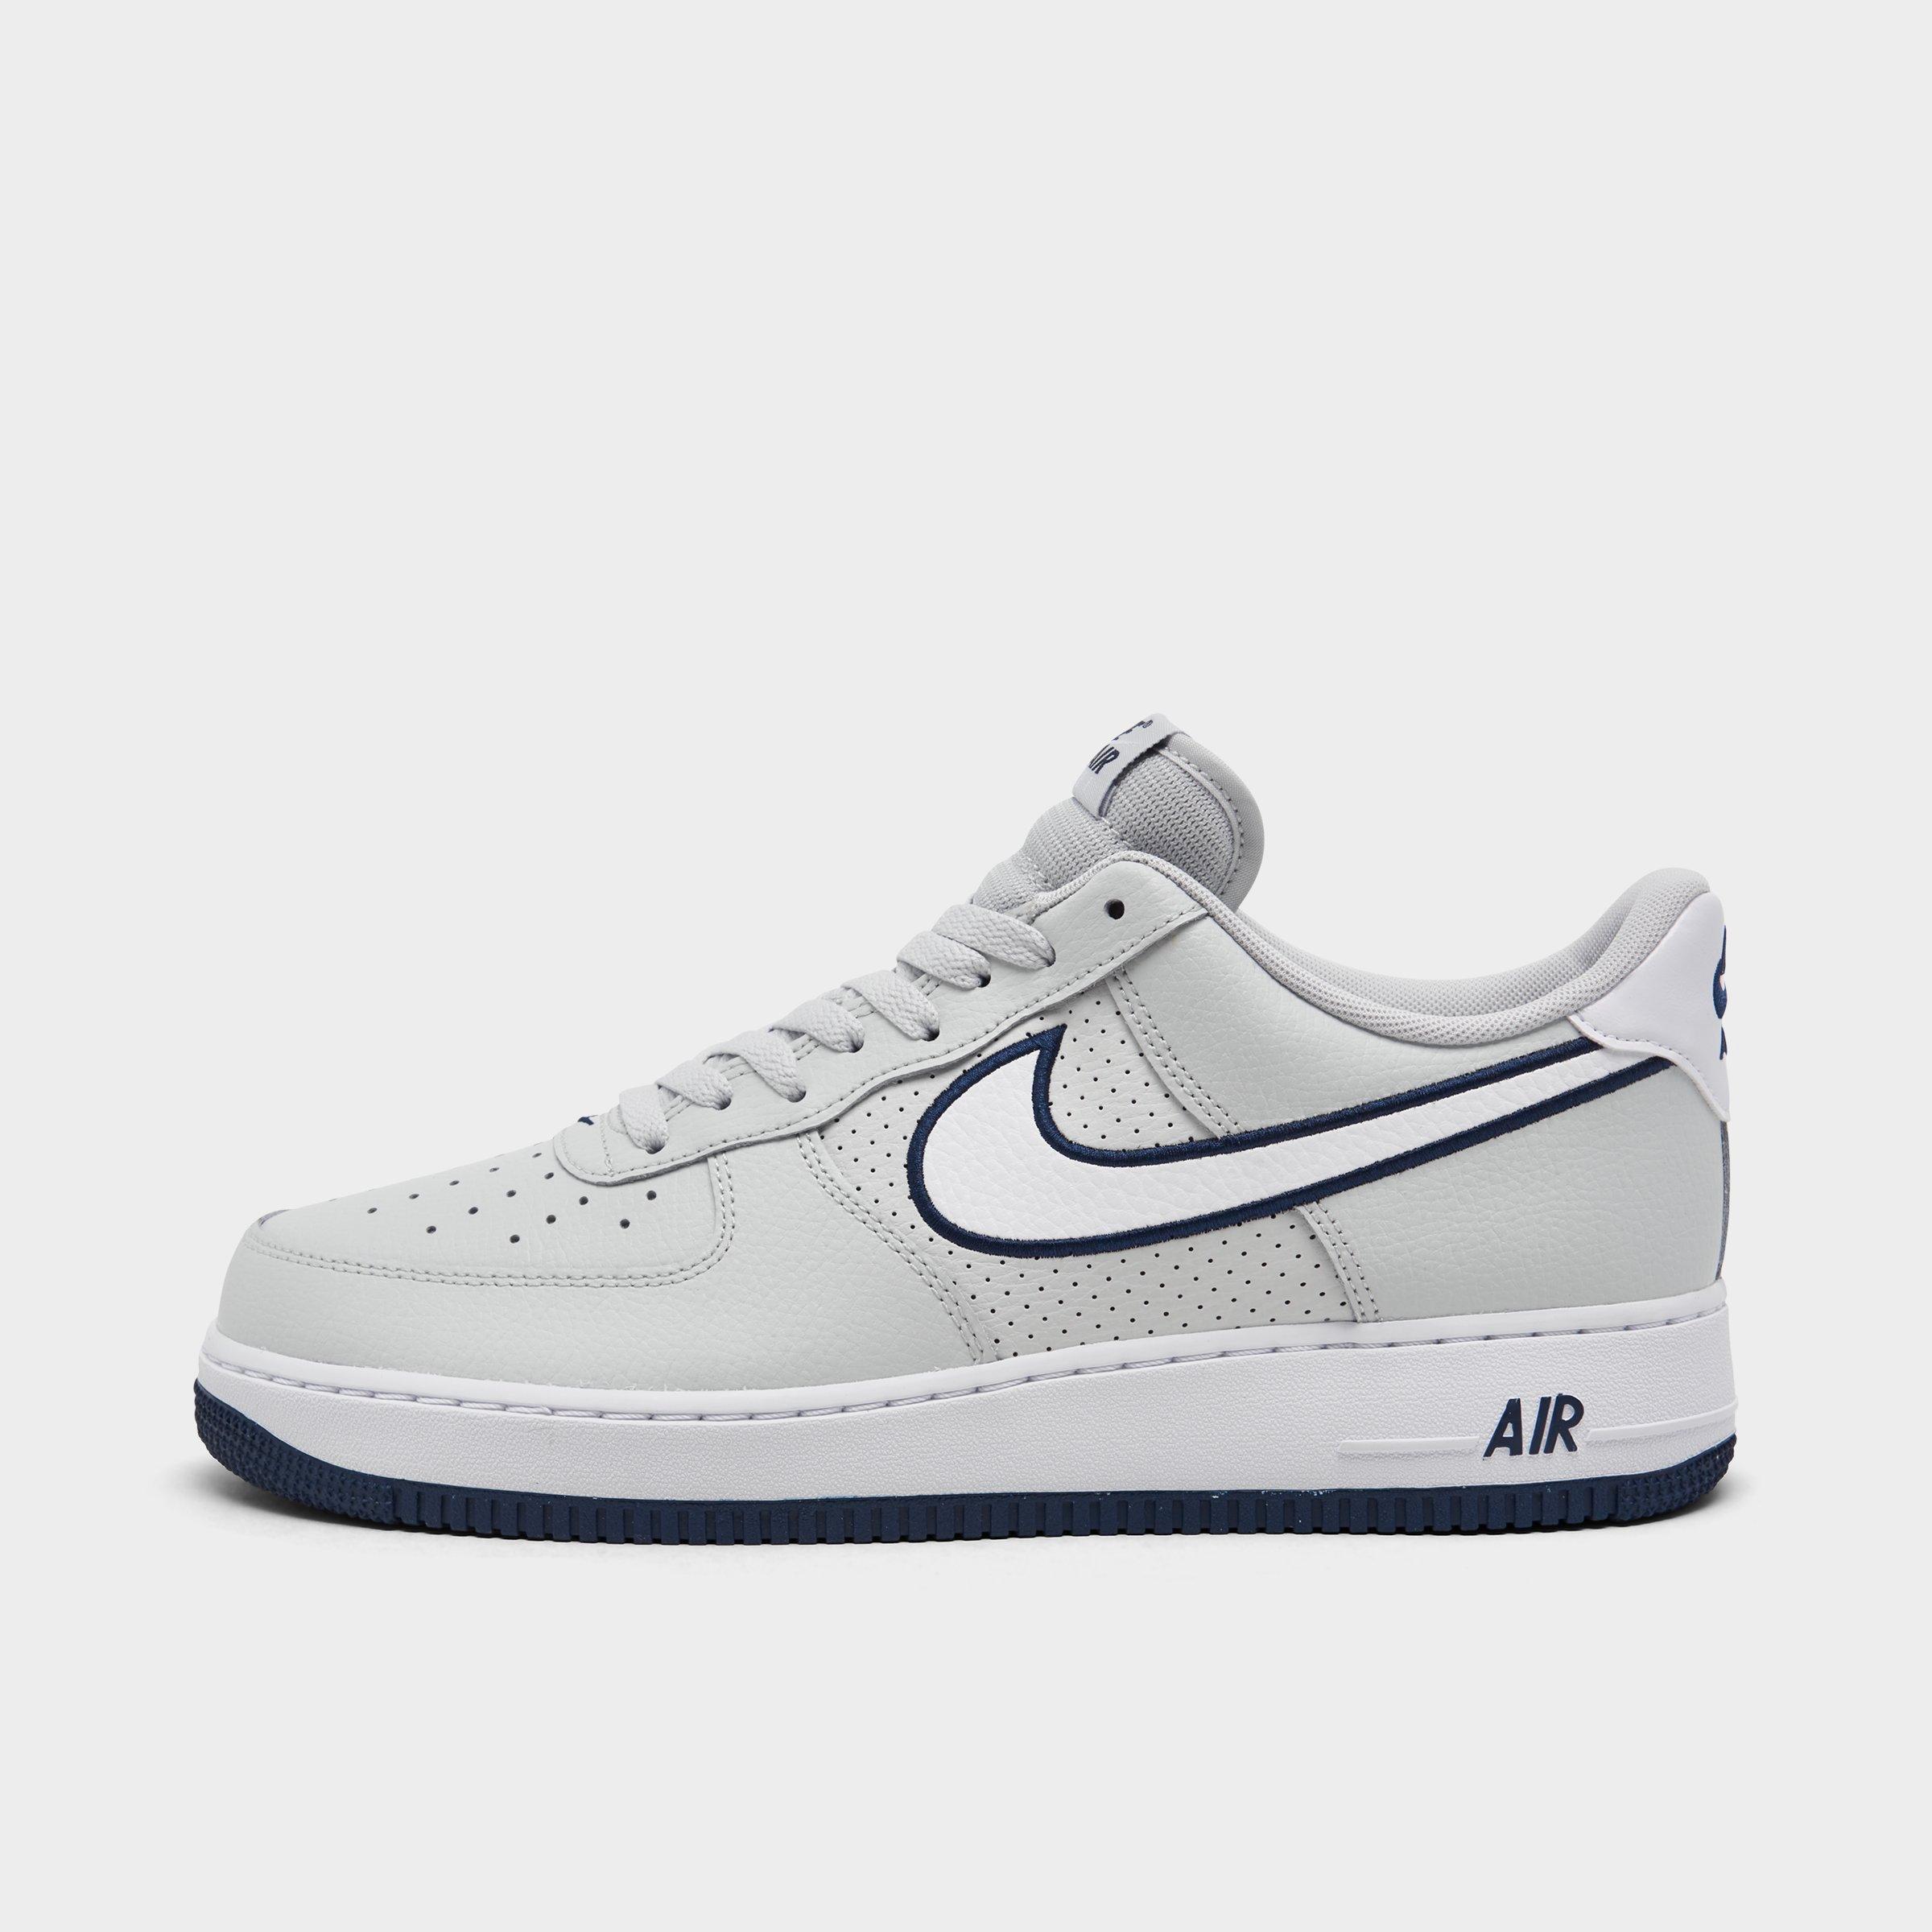 Nike Men's Air Force 1 Low Casual Shoes In Photon Dust/black/white